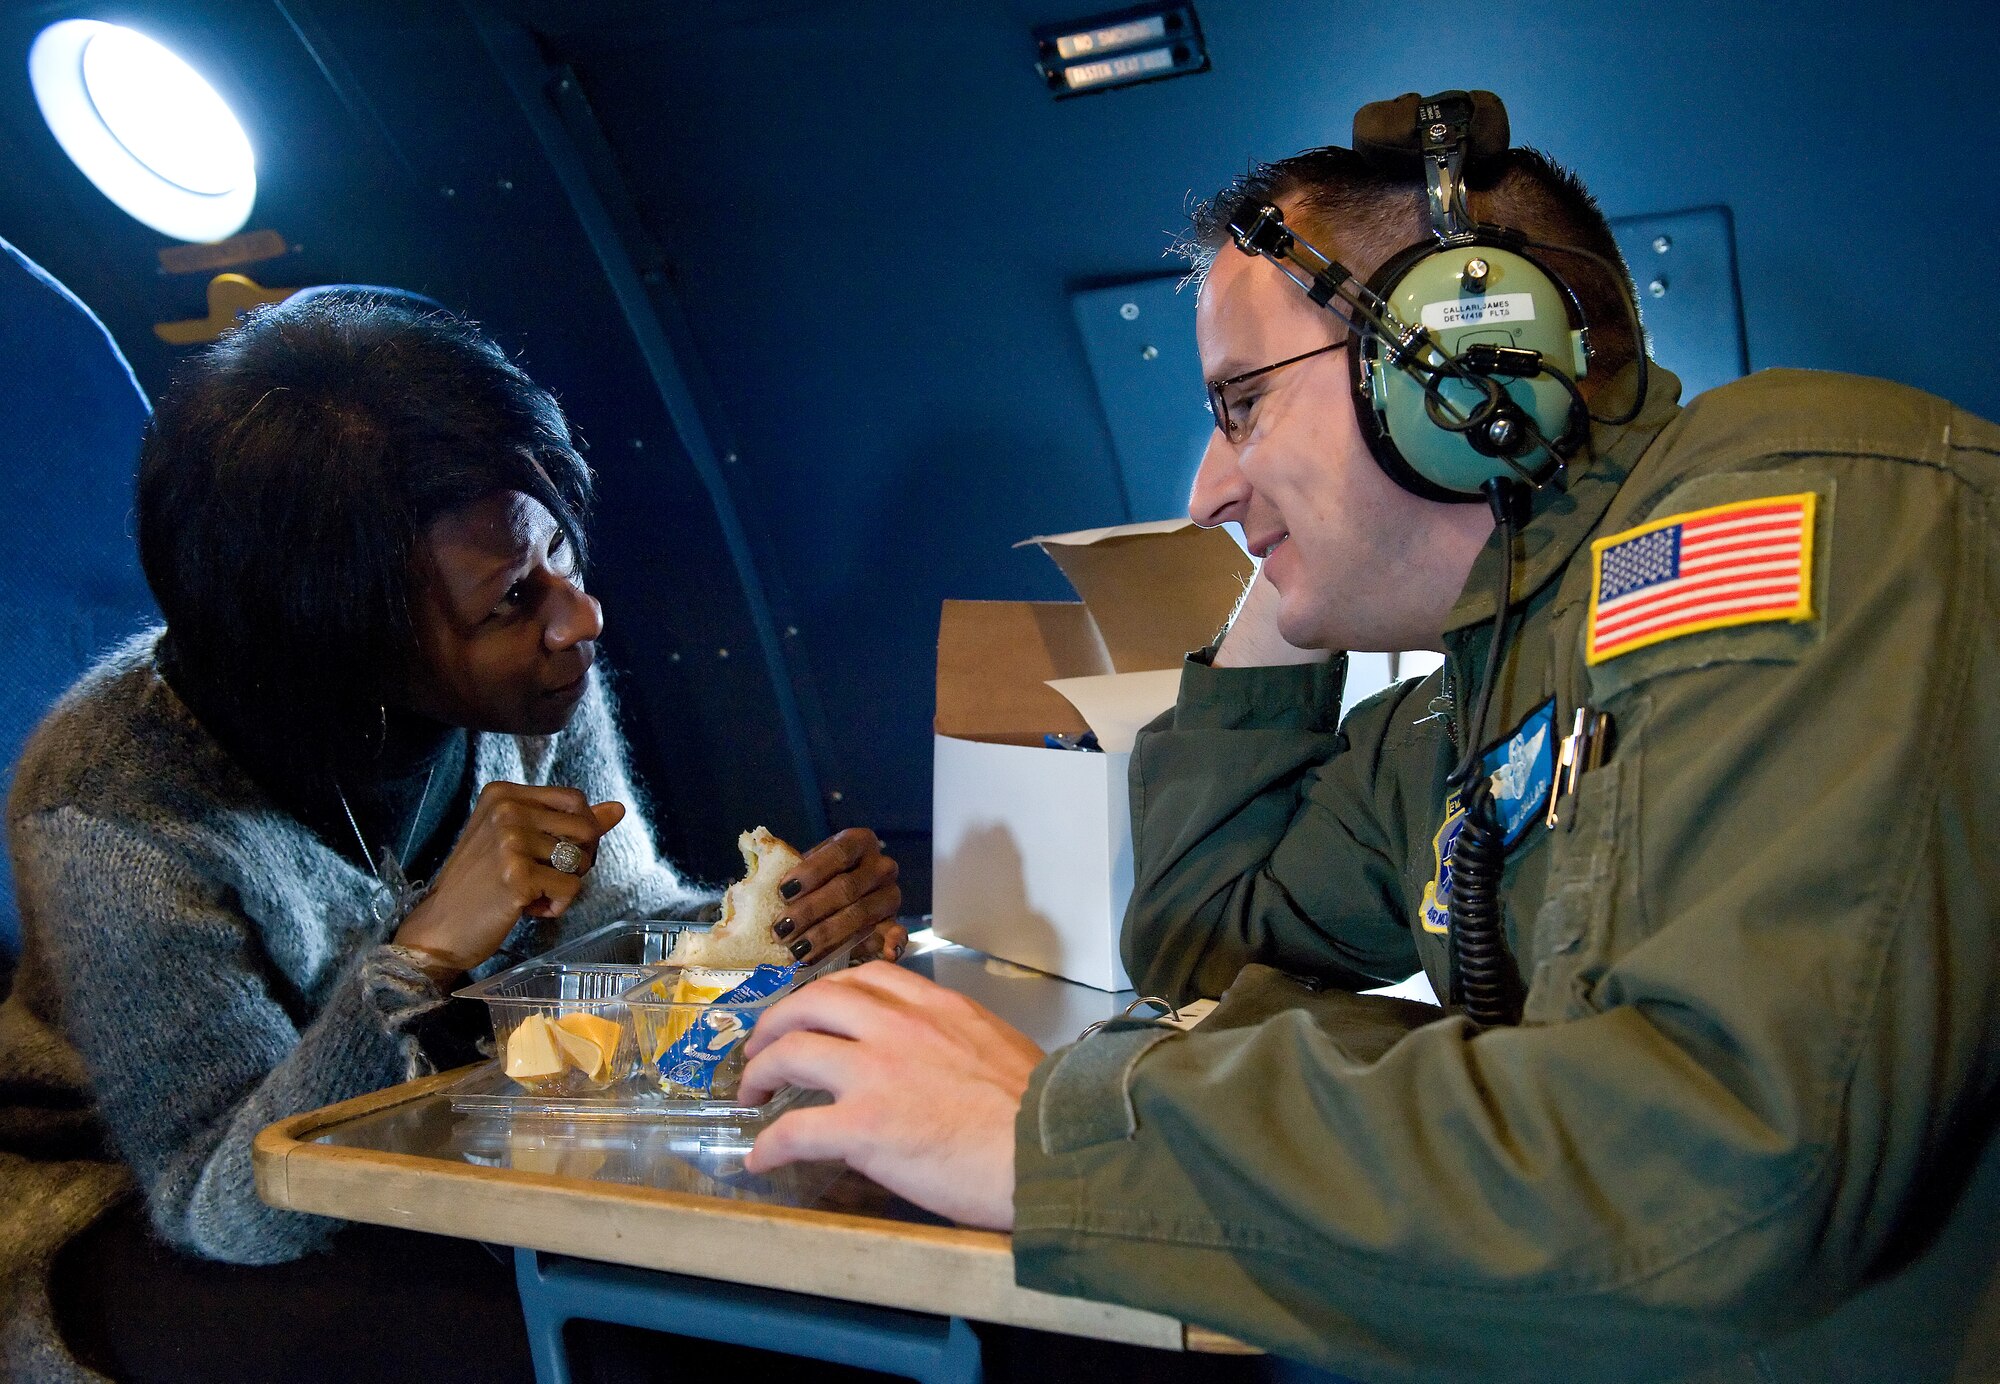 S. Renee Smith, Air Force Mortuary Affairs Operations honorary commander, Dover Air Force Base, Del., left, talks with Master Sgt. James Callari, 9th Airlift Squadron loadmaster, right, in the crew relief compartment of a C-5M Super Galaxy while in-flight during an air refueling flight Oct. 29, 2014. Smith sat behind the pilots during the approach and landing back at Dover AFB. (U.S. Air Force photo/Roland Balik)